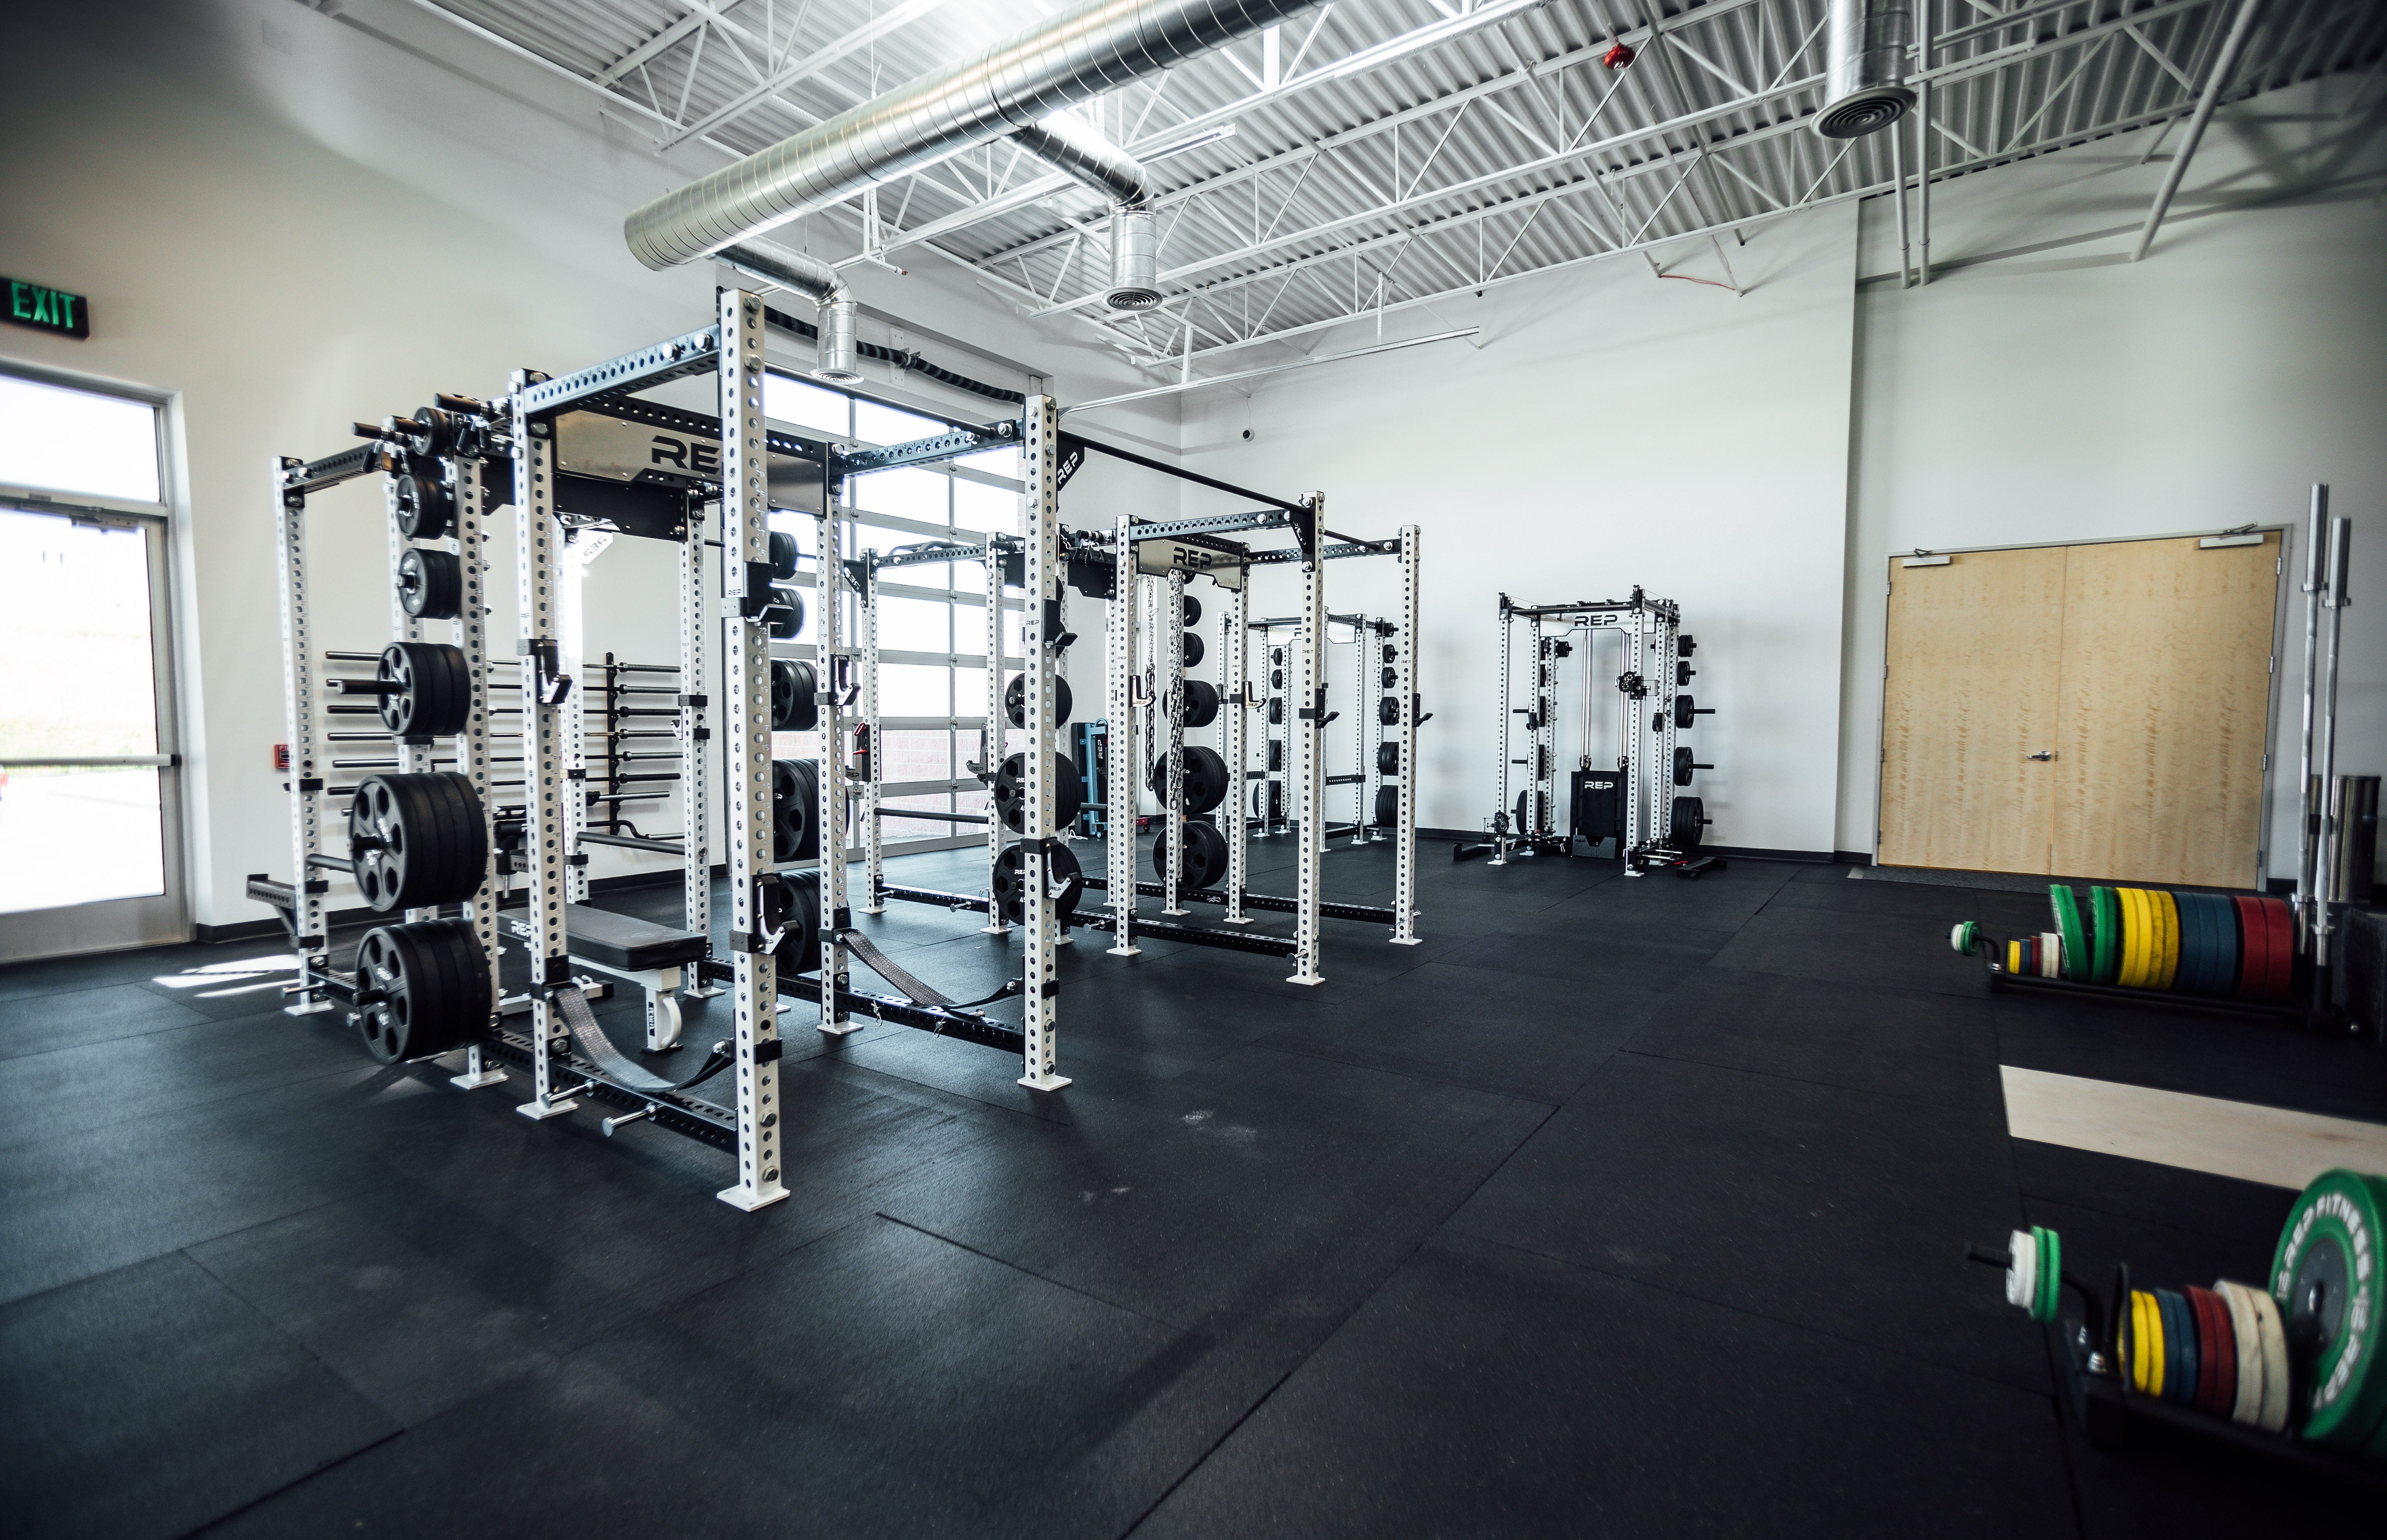 Facility Build Out With PR-5000 Power Racks